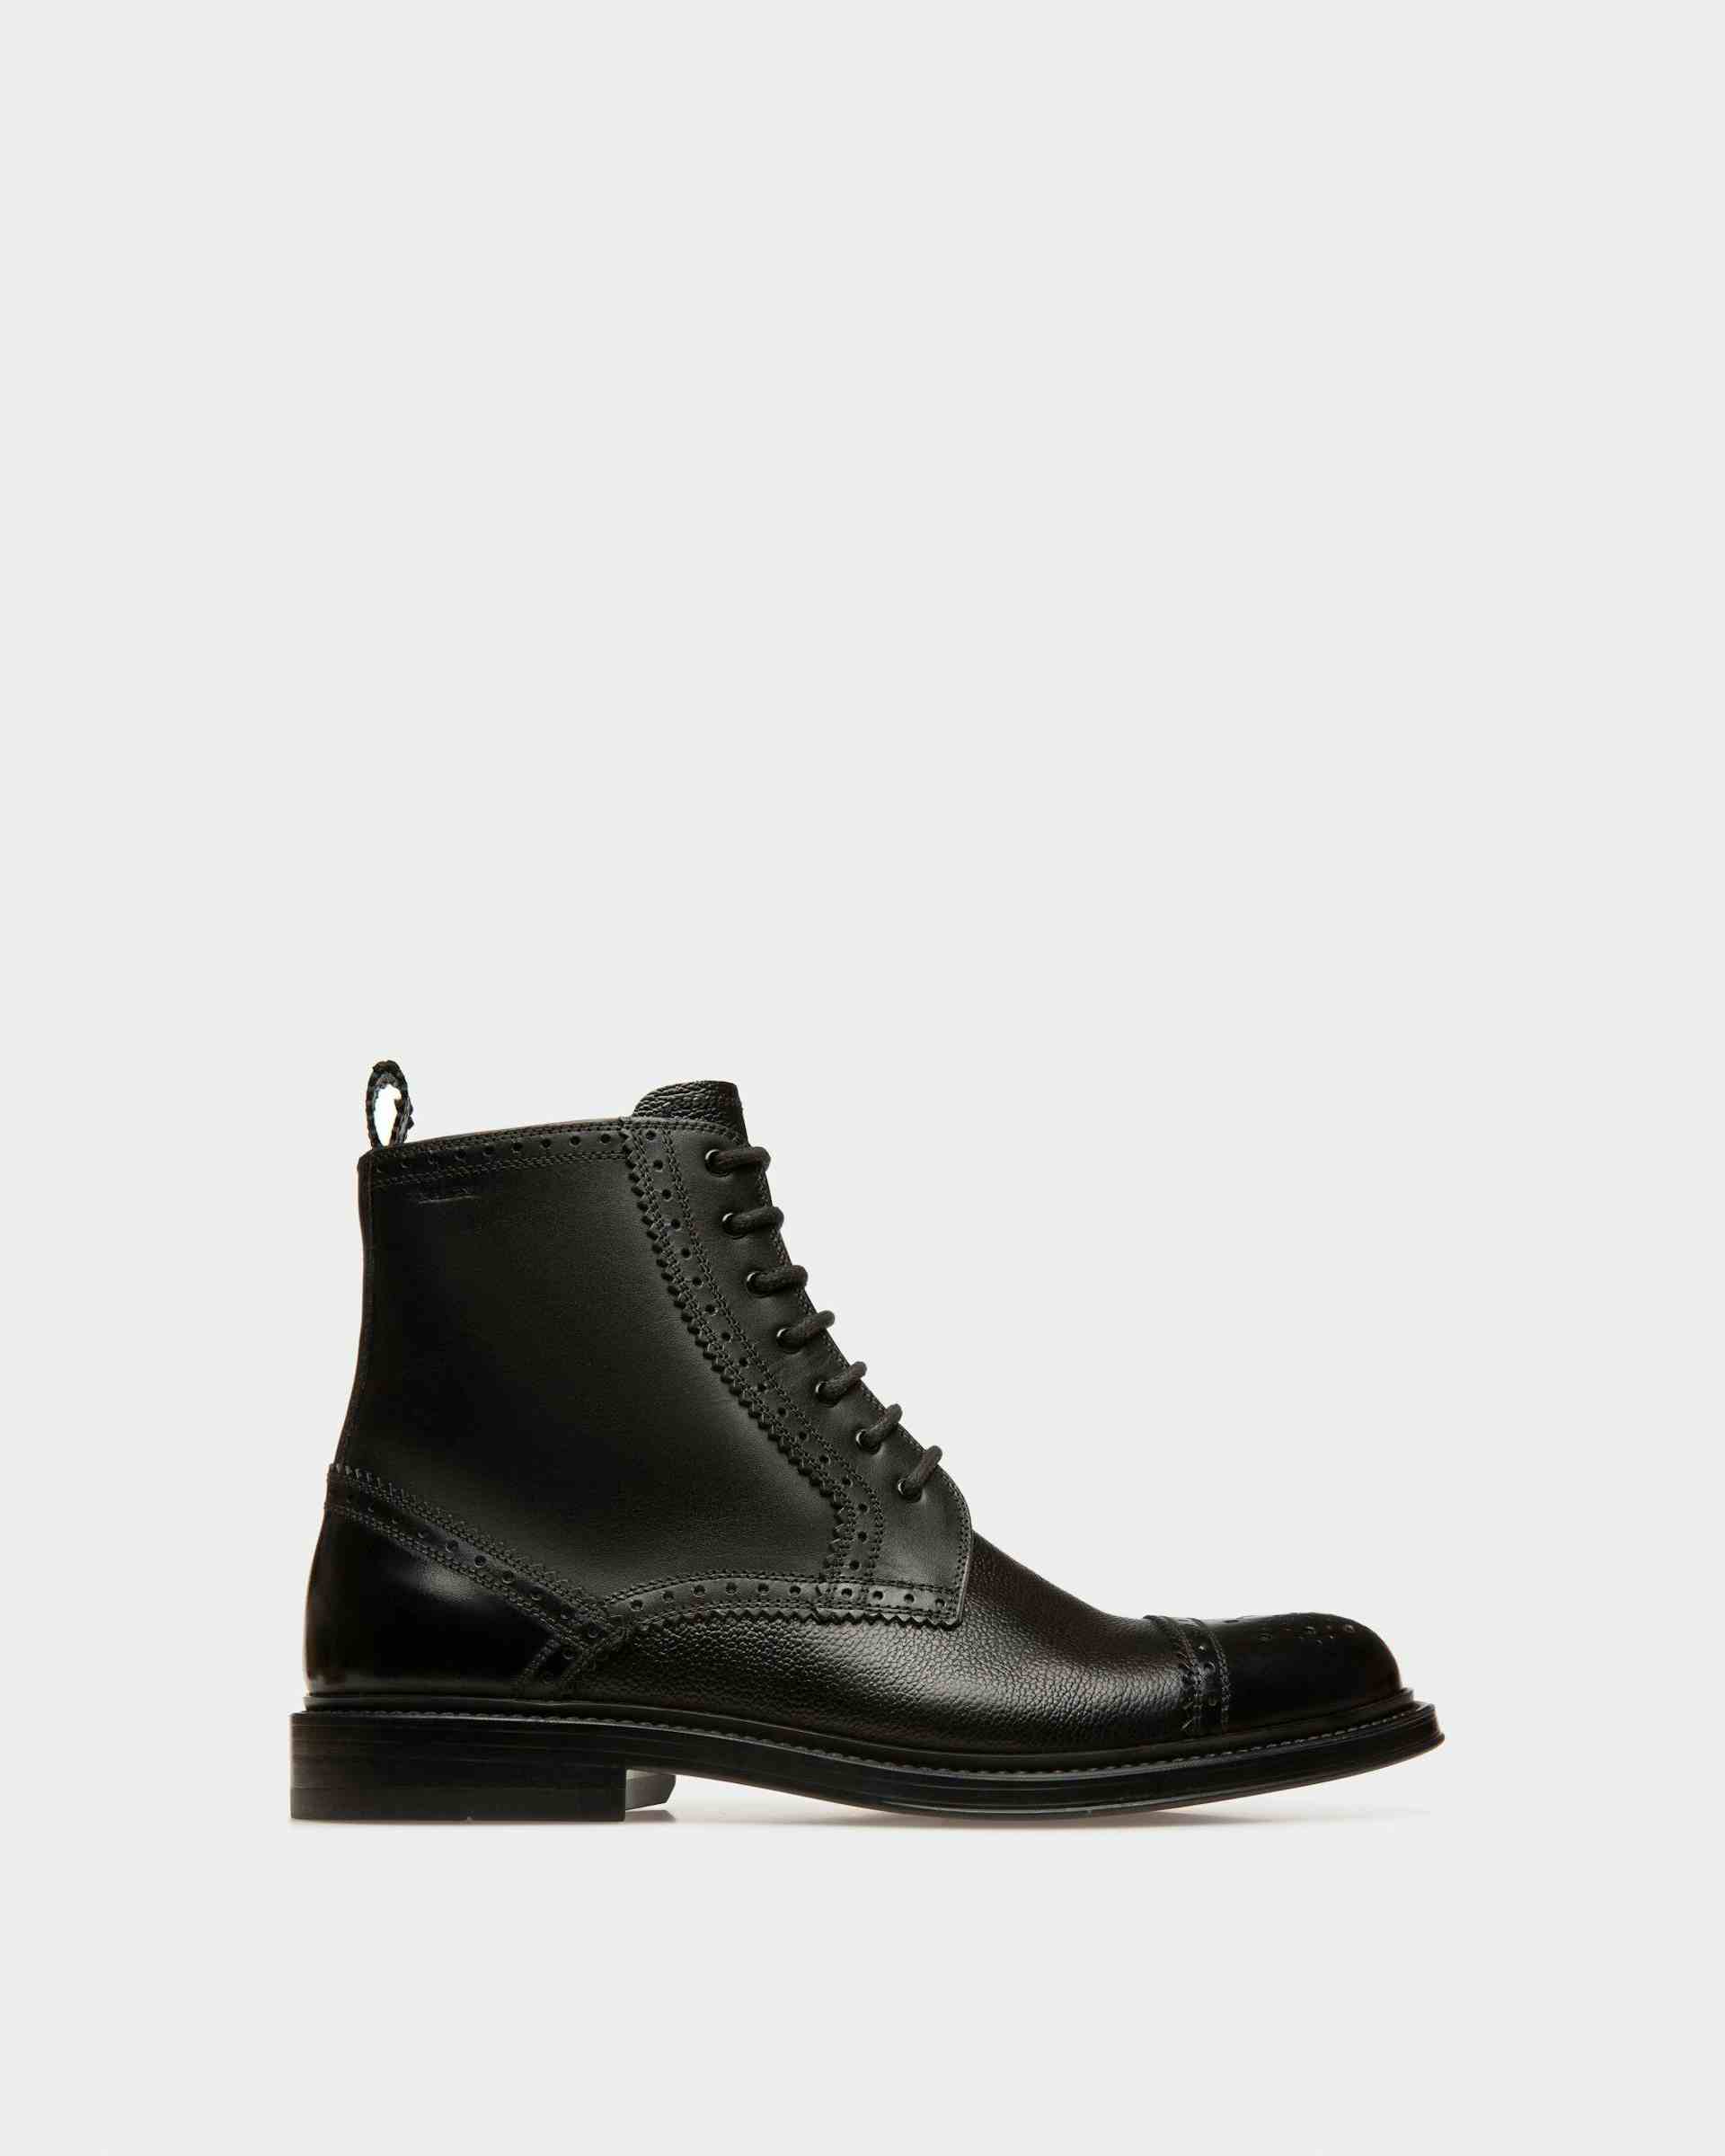 Nicoldon Leather Boots In Black - Men's - Bally